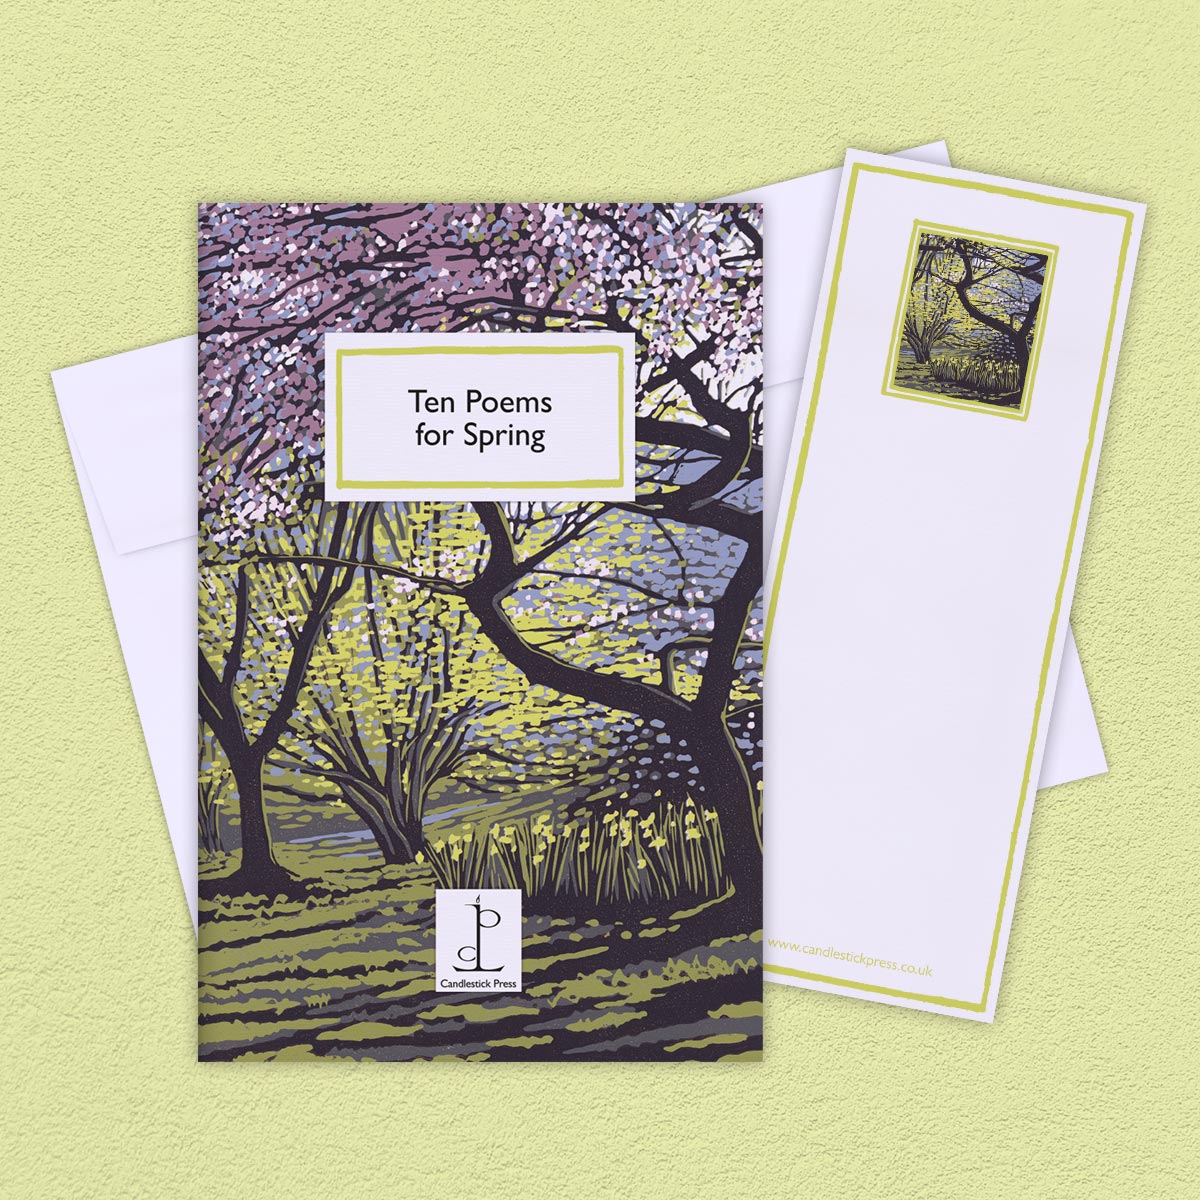 The Poem Pamphlet, 'Ten Poems about Spring' sits on a light yellow background with the bookmark and white envelope.